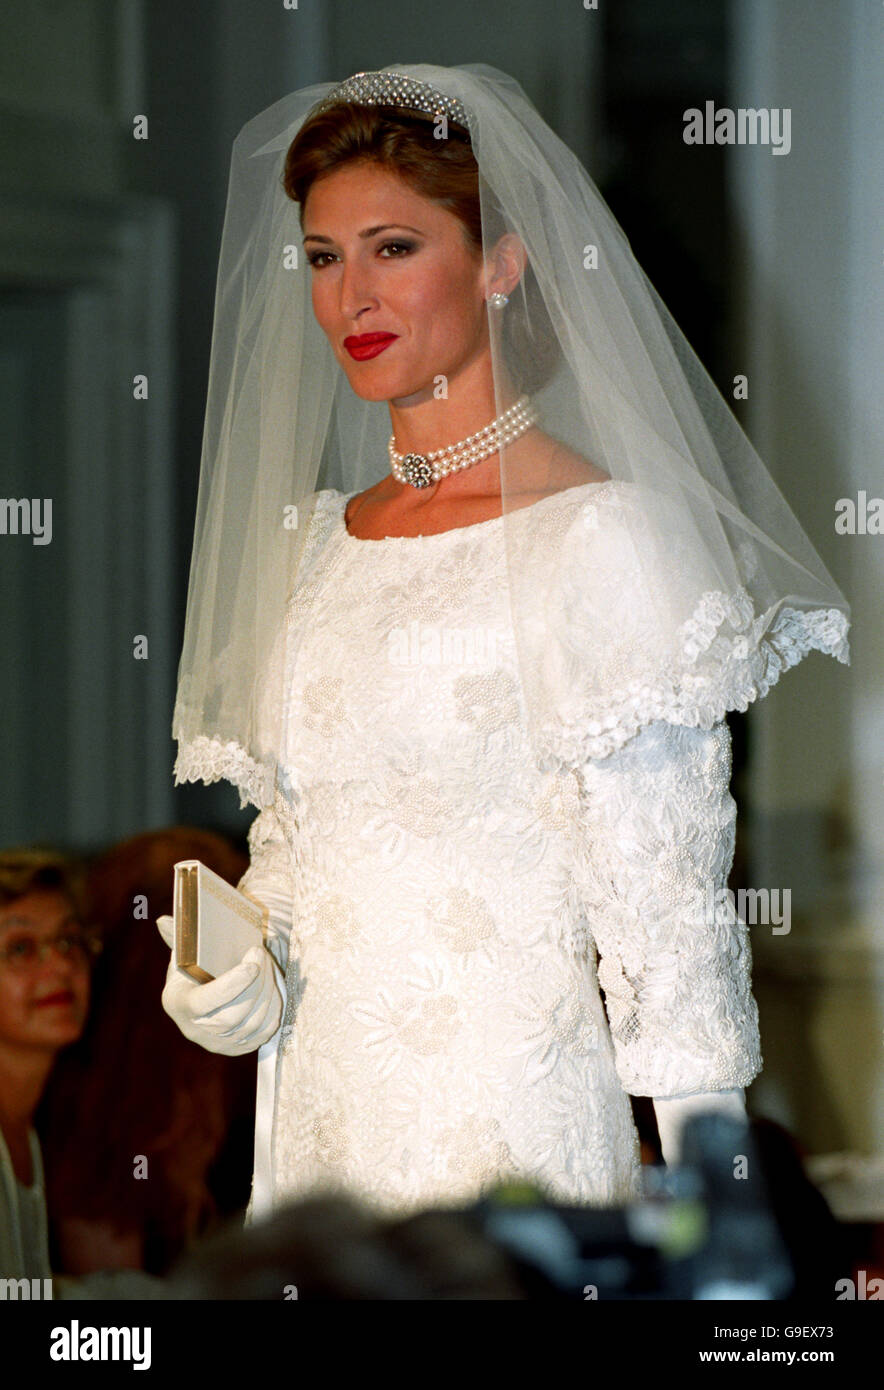 Paula Hamilton. Modelling a wedding dress in lace, embroidered with seed pearls over cream silk crepe. Stock Photo